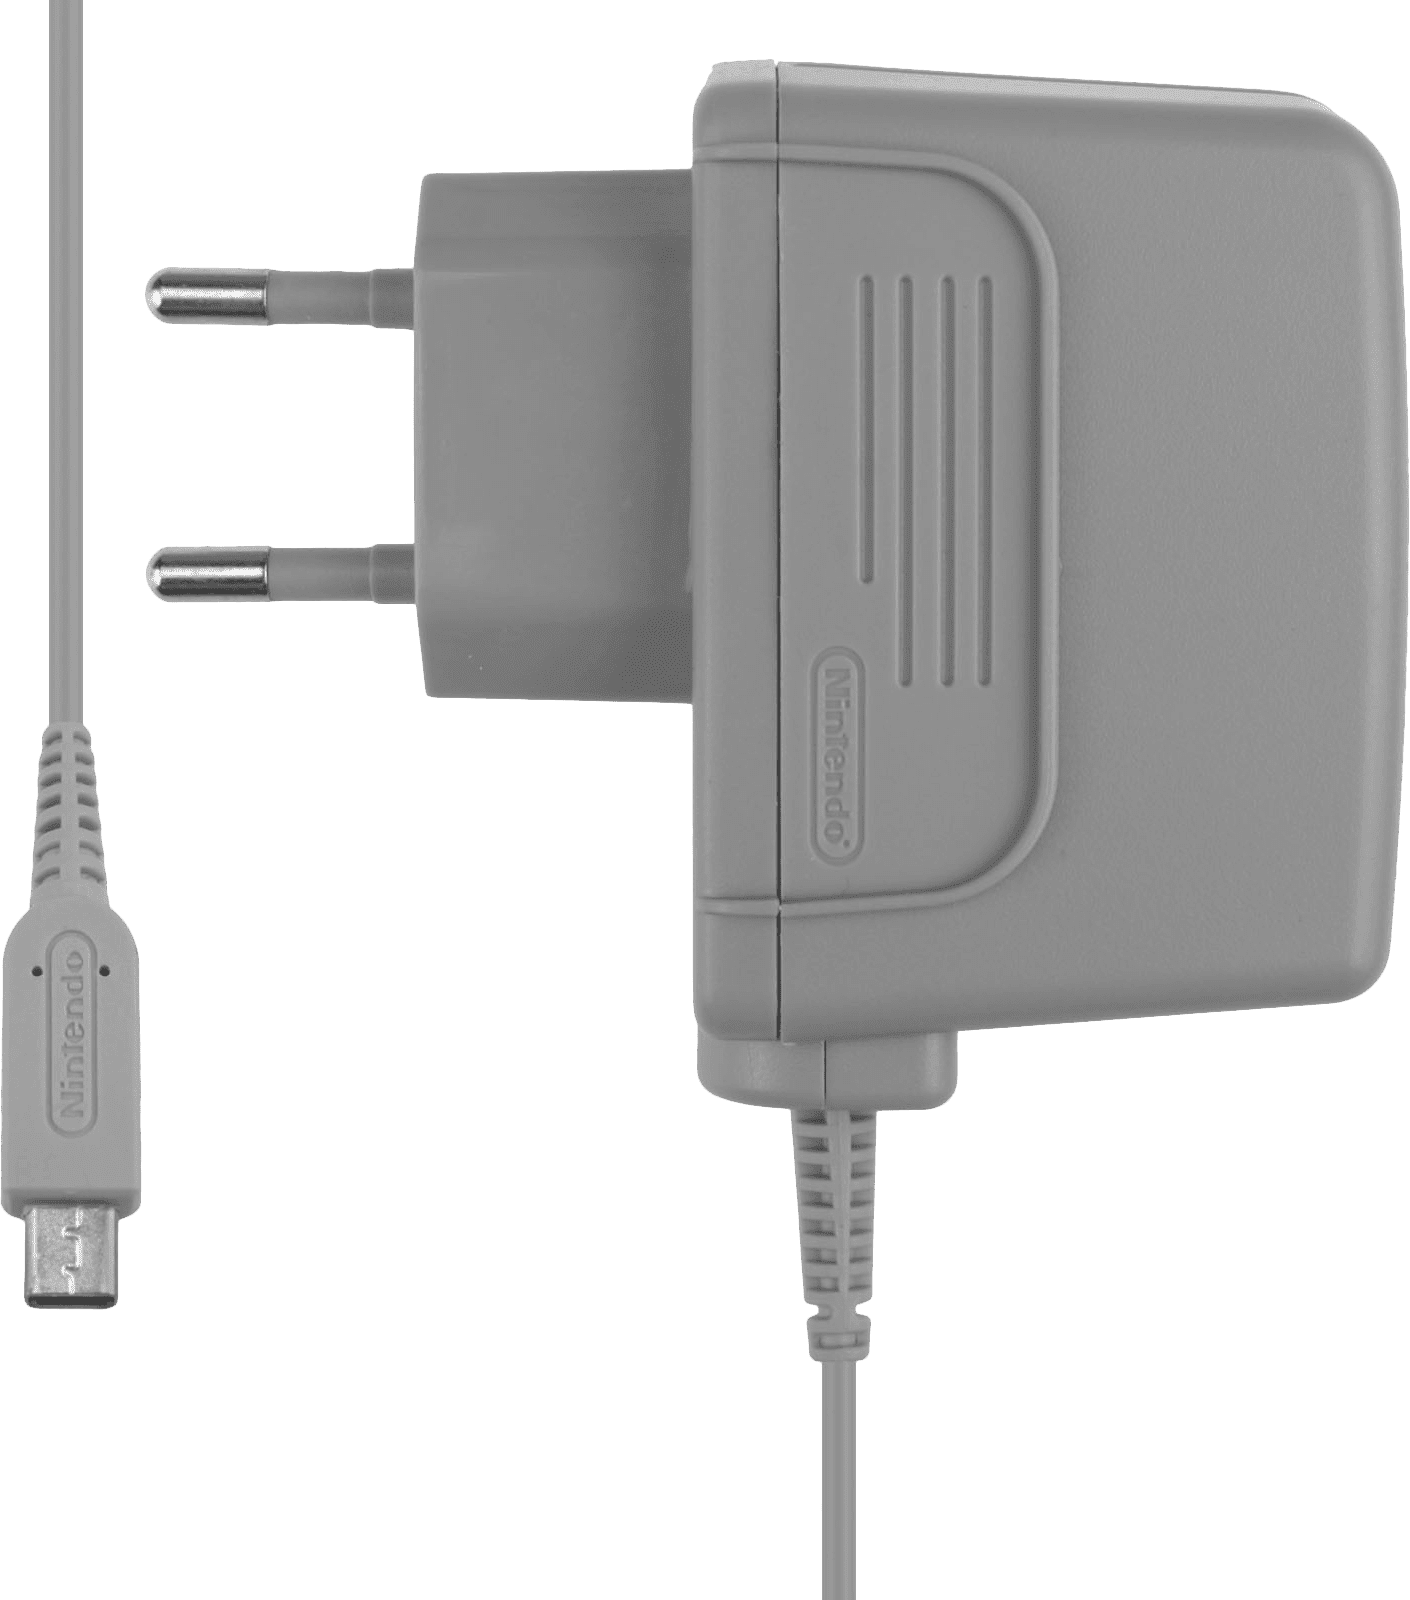 Nintendo AC Adapter / Charger / Power Supply / PSU (DSi / DSi XL / 3DS / 3DS XL)